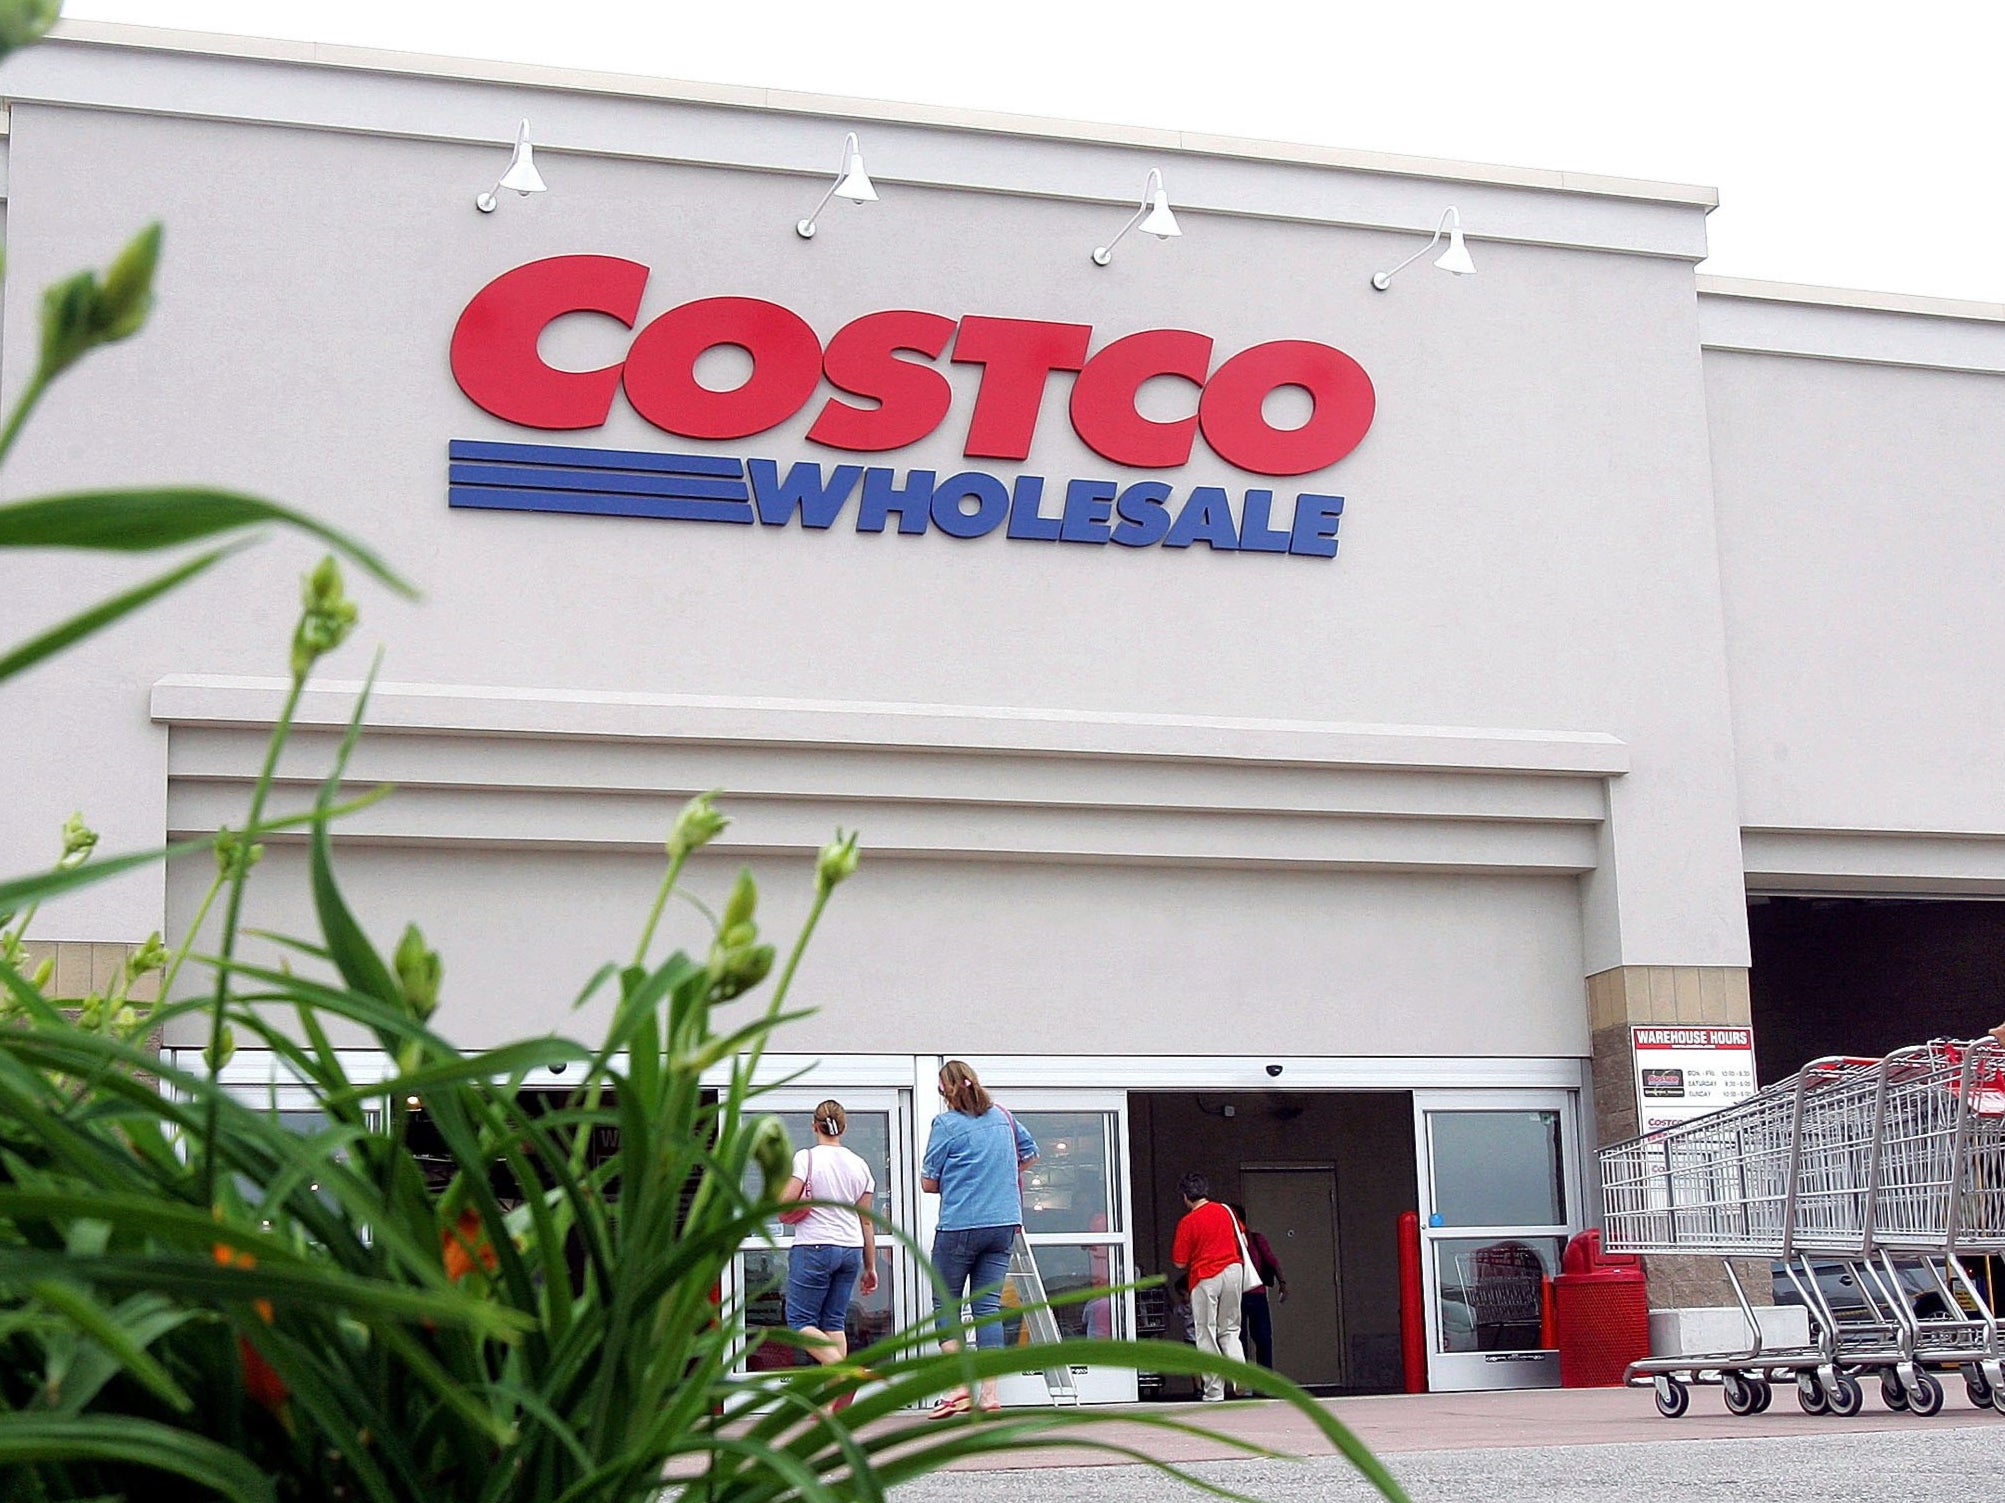 Costco stops selling coconut milk brand after allegations of monkey labour, Peta says